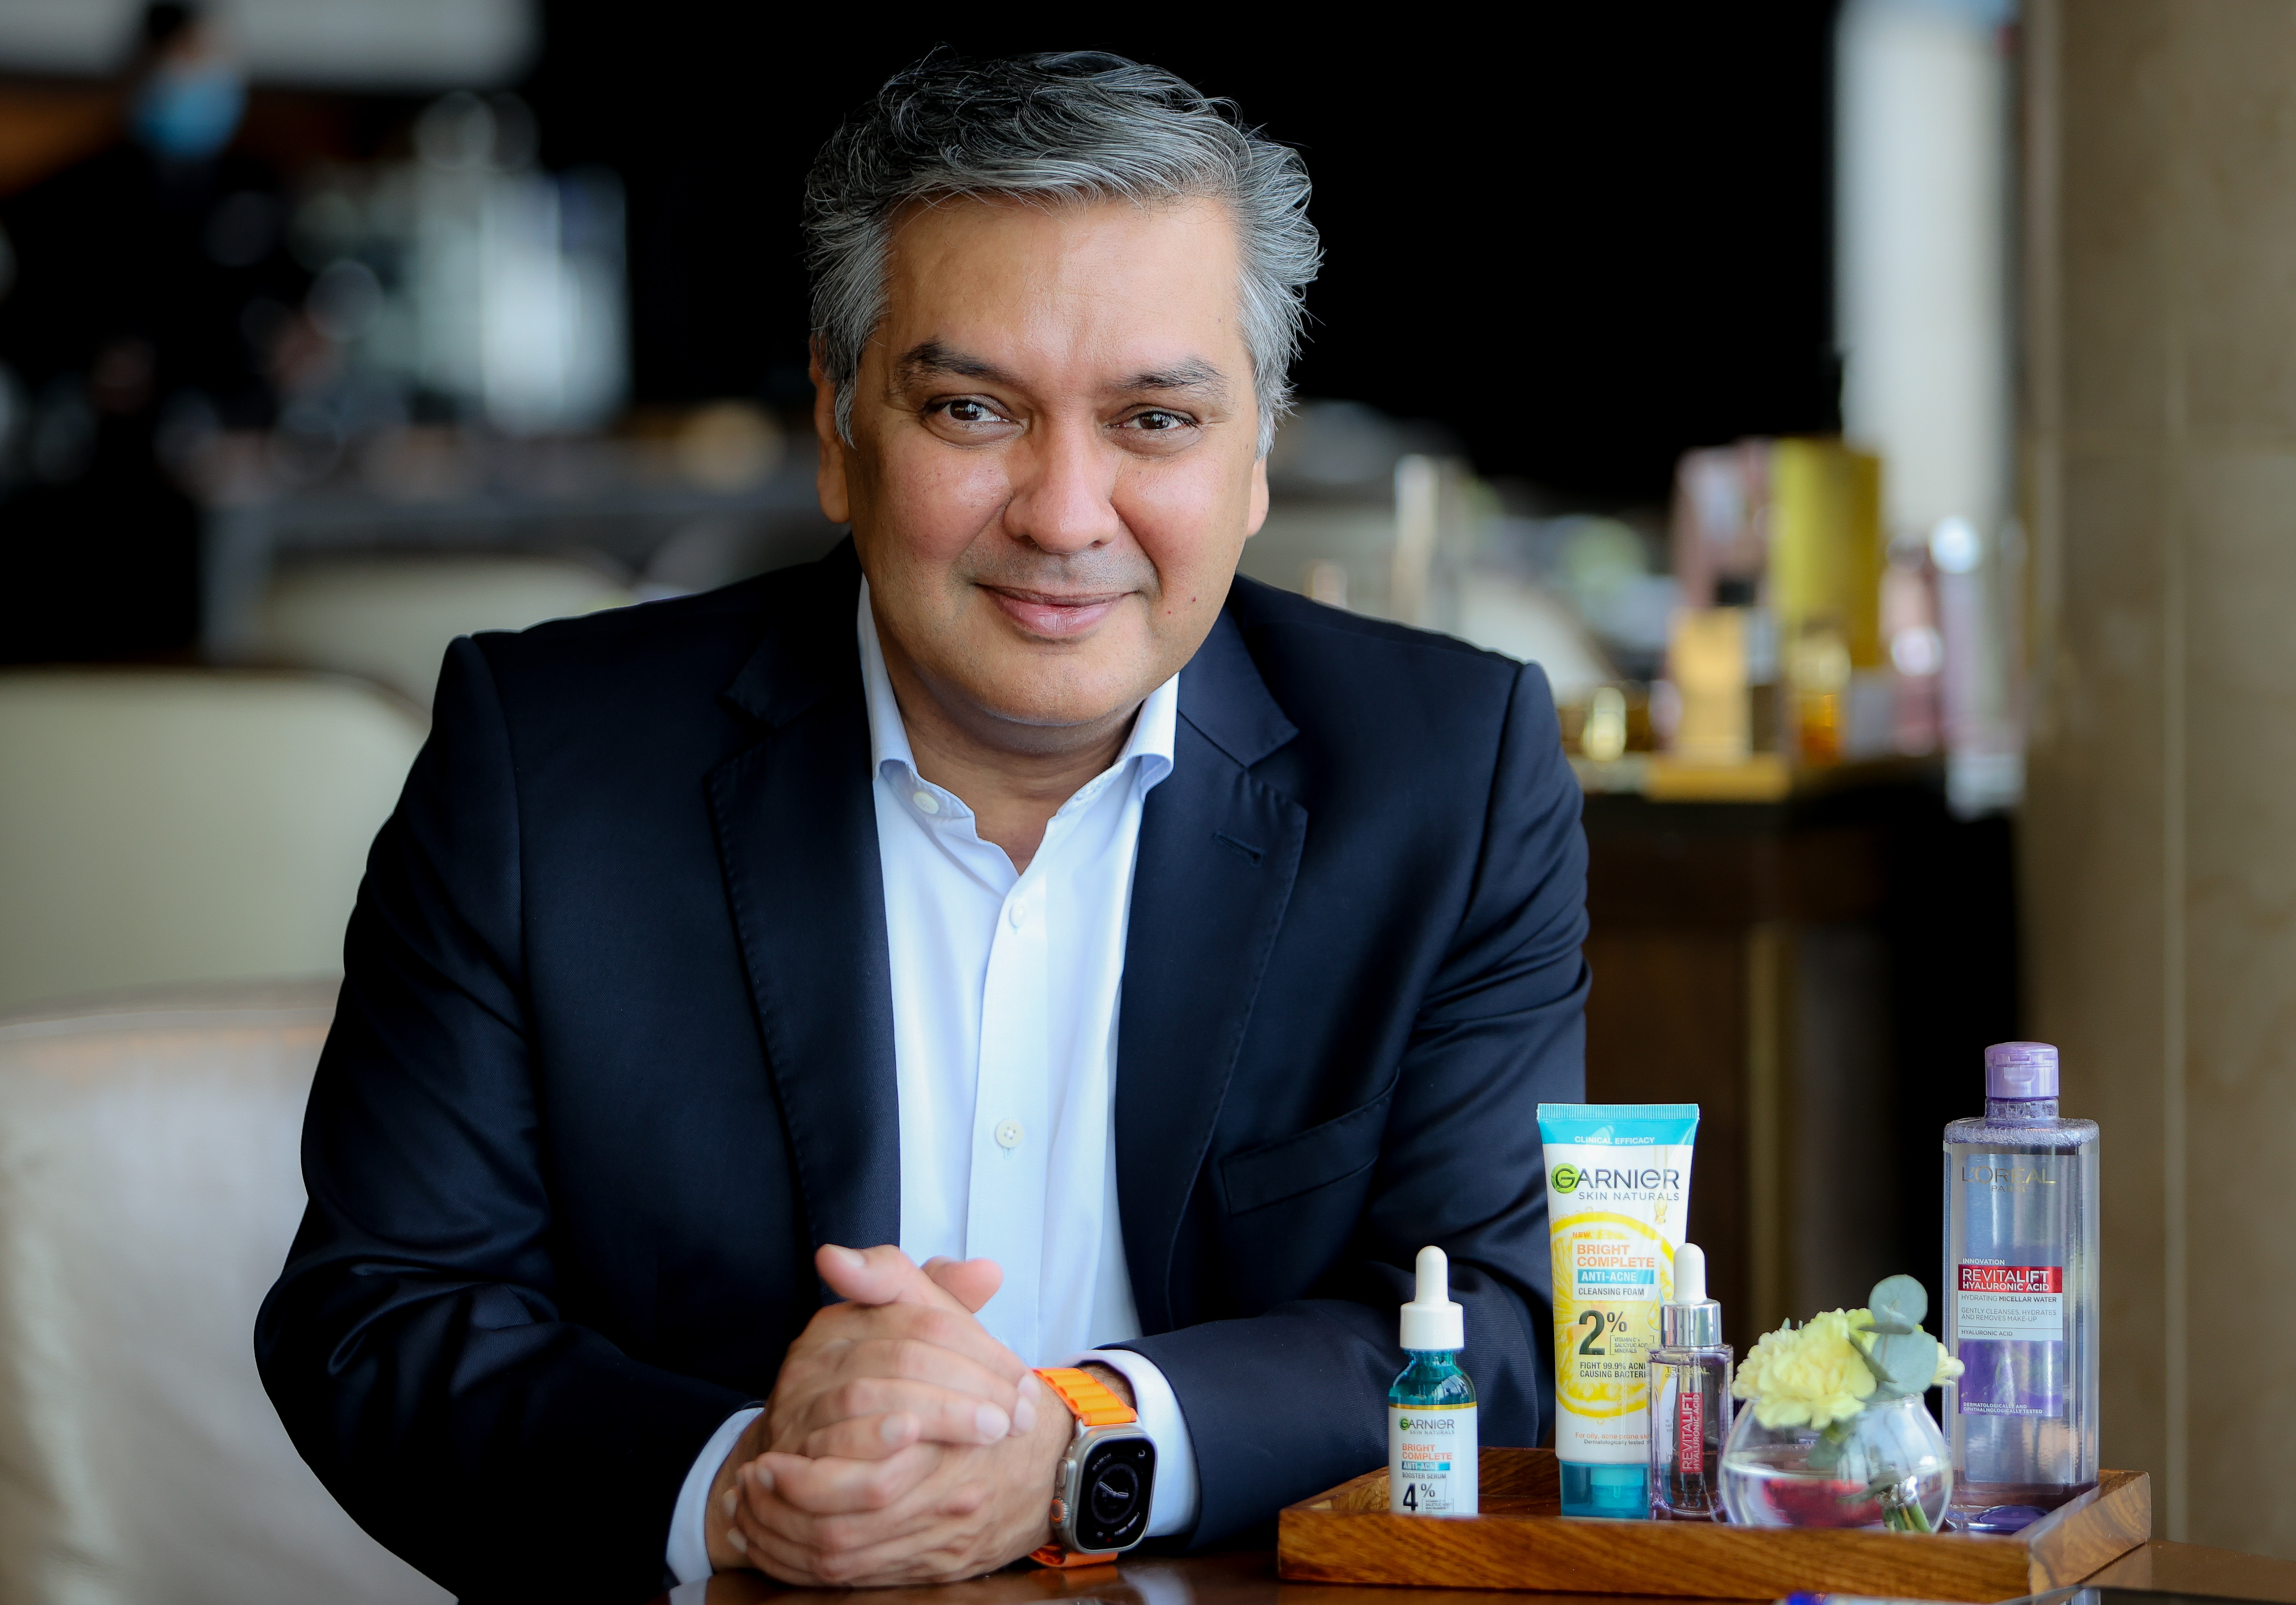 “Beauty is a universal need that extends to men and women of all ages, races, and social classes,” according to Vismay Sharma, L’Oreal SAPMENA president.